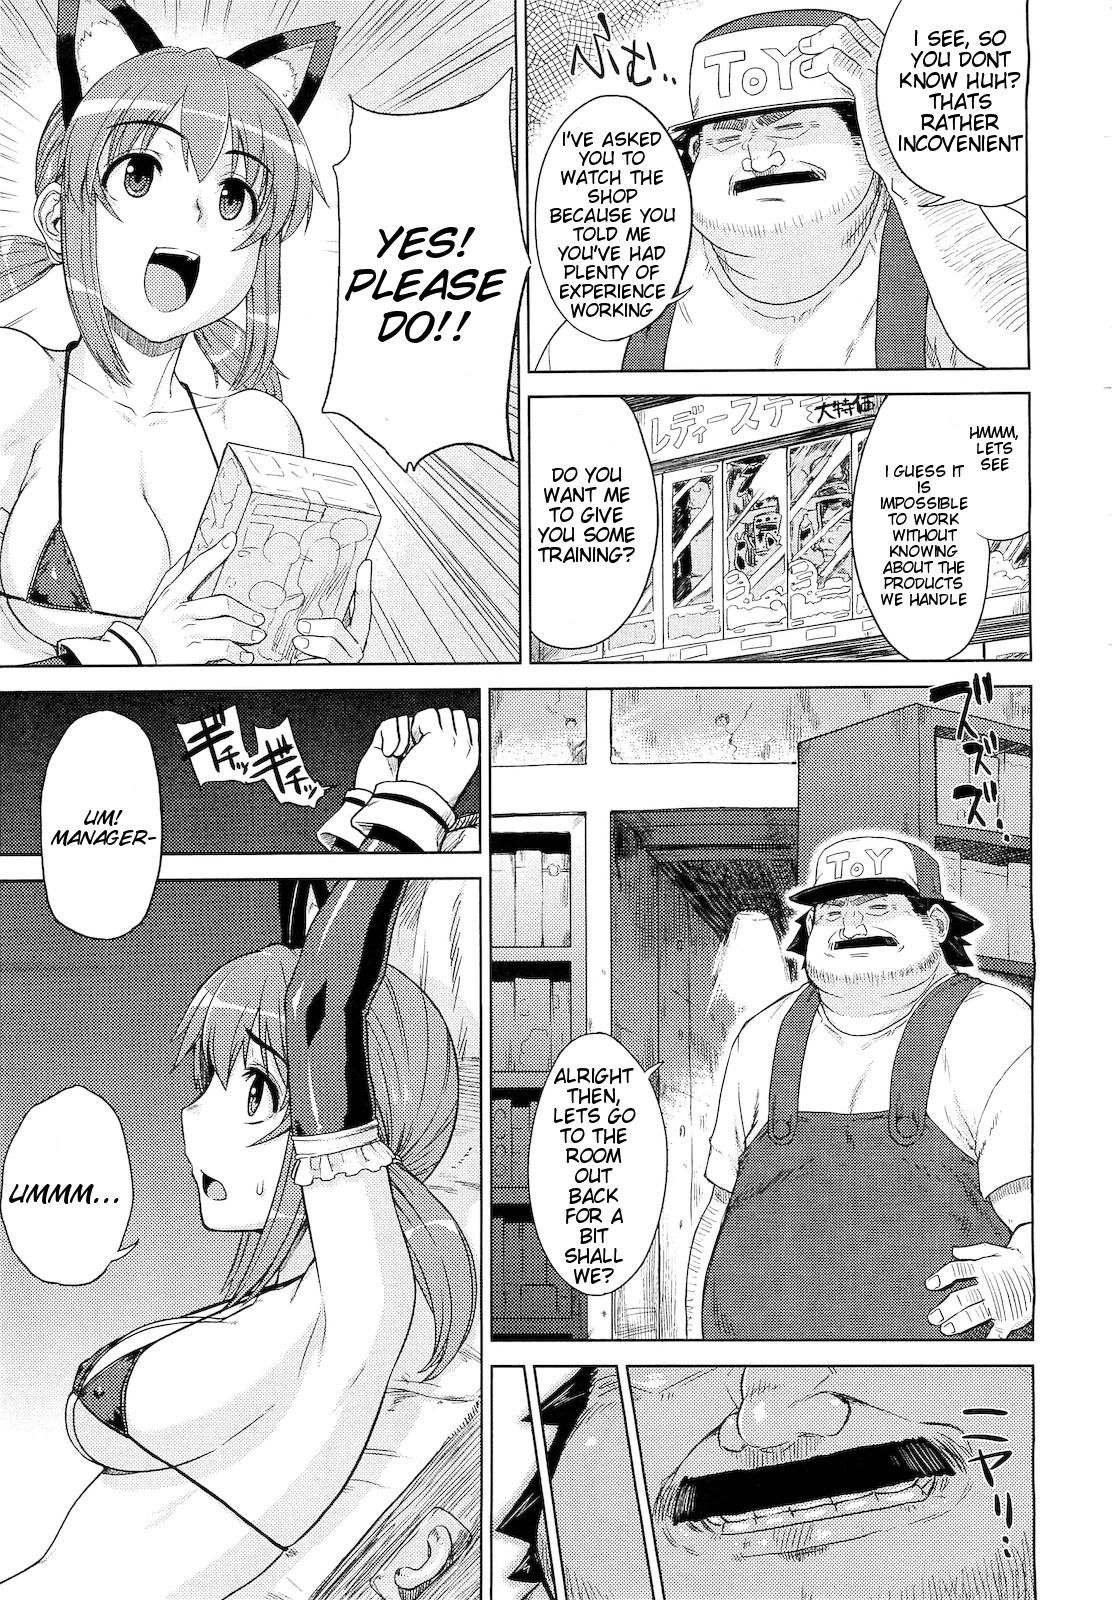 Tan ◯◯ no Omochaya-san | A Questionable Toy Store Dorm - Page 5